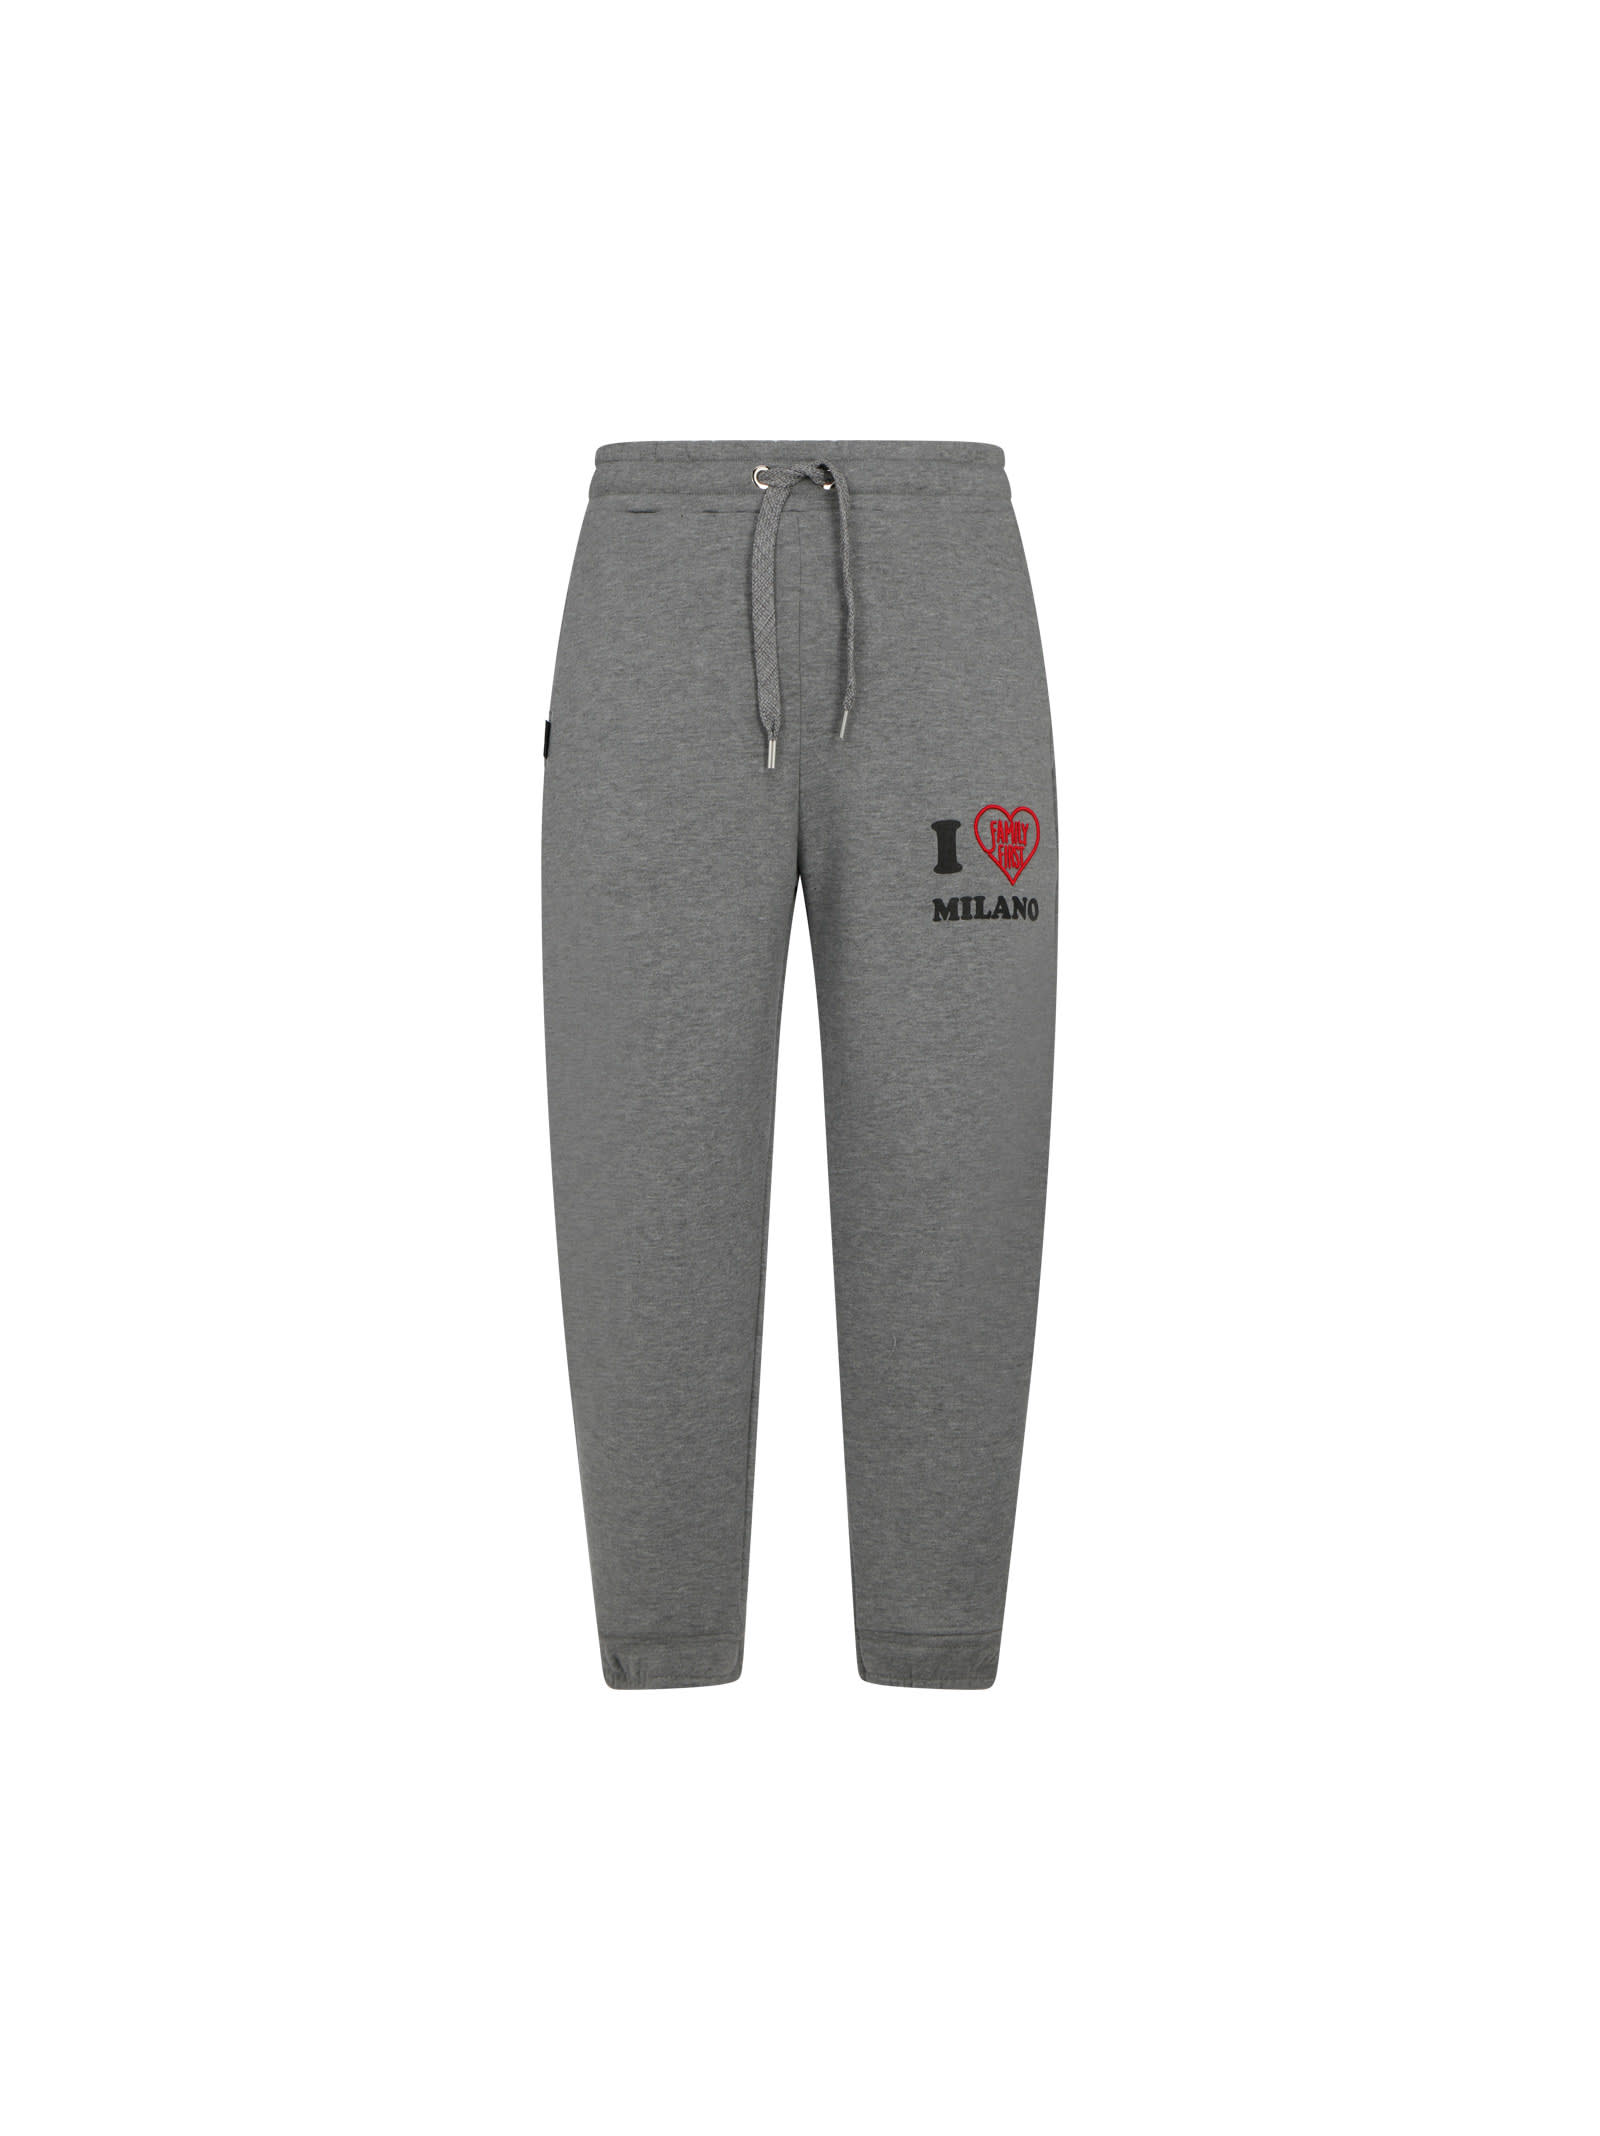 Family First Milano Sweatpants